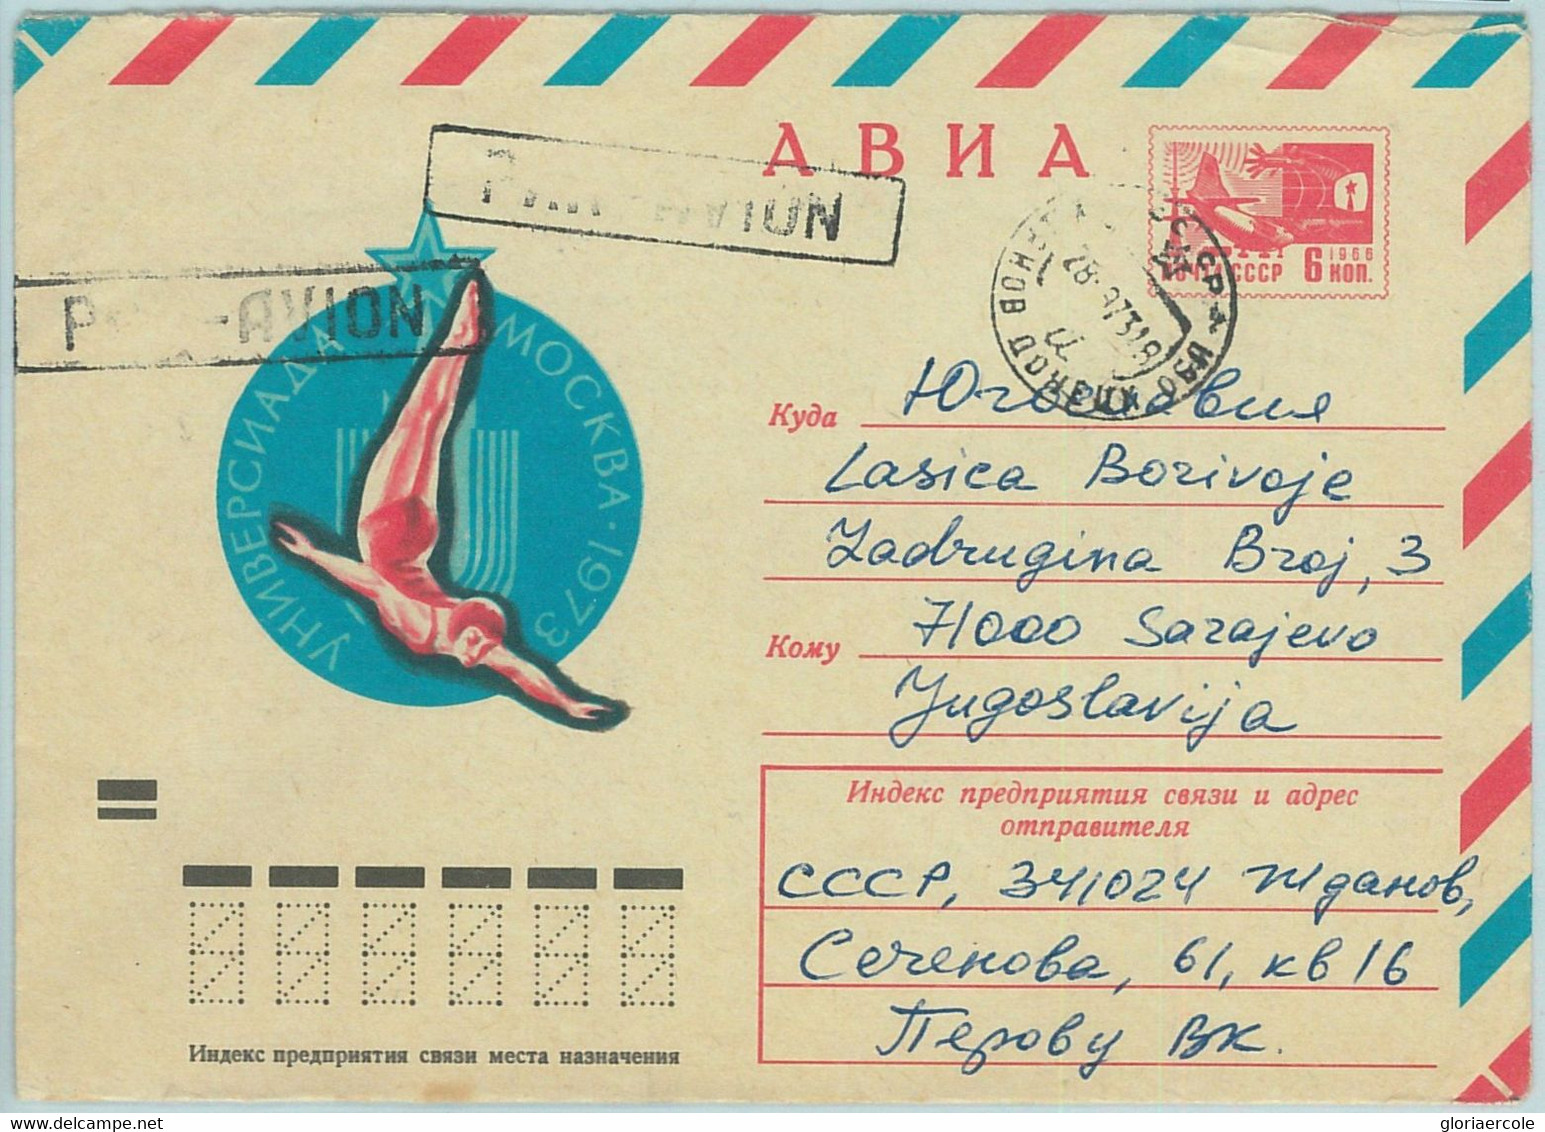 67800 - RUSSIA - POSTAL HISTORY - STATIONERY COVER - 1973, Universiade Games, Diving - Diving